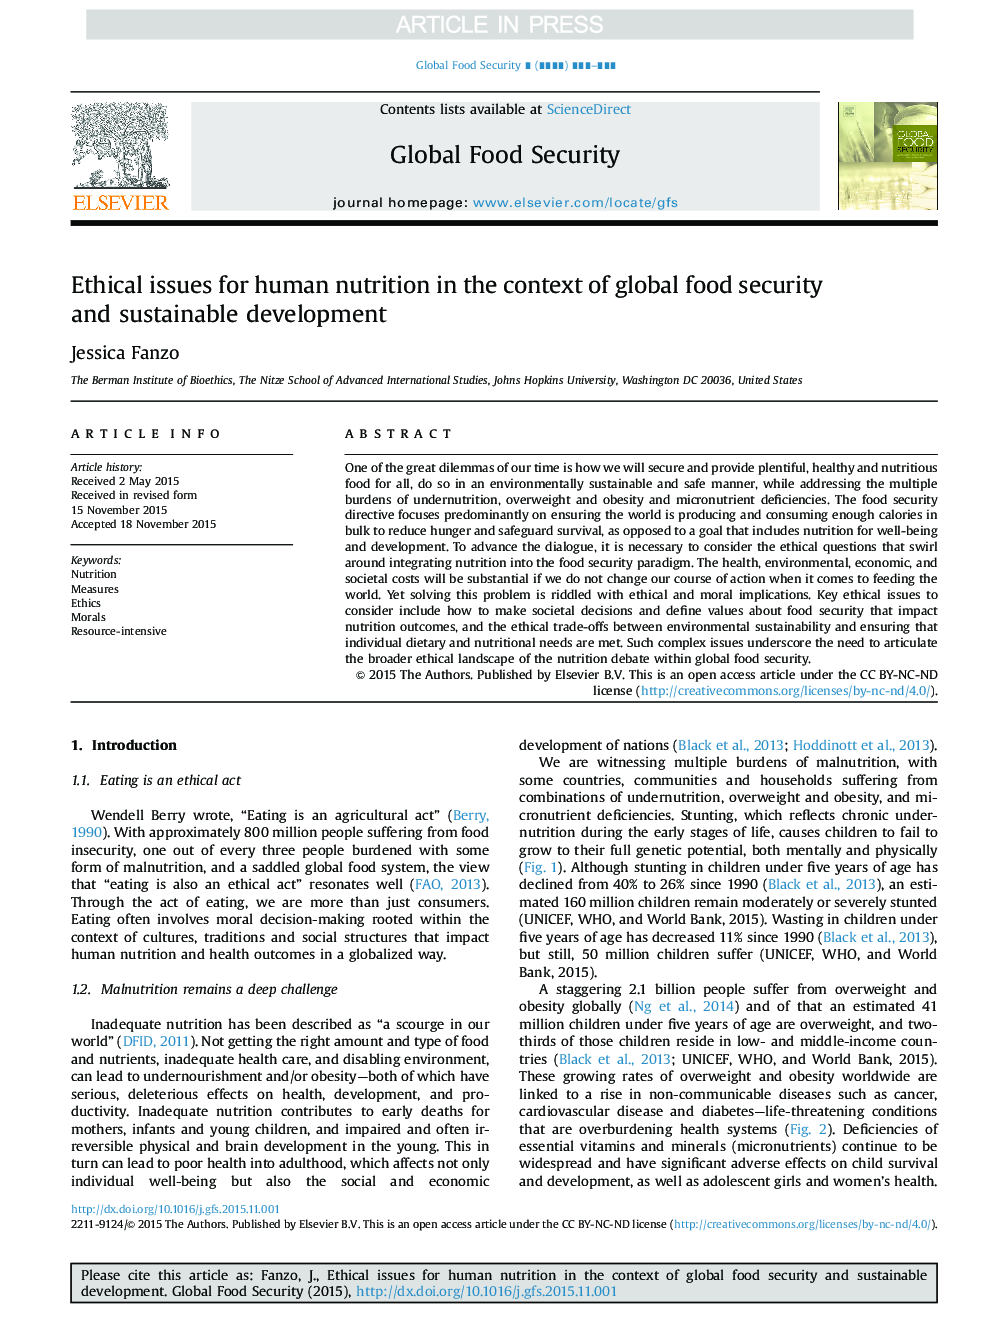 Ethical issues for human nutrition in the context of global food security and sustainable development